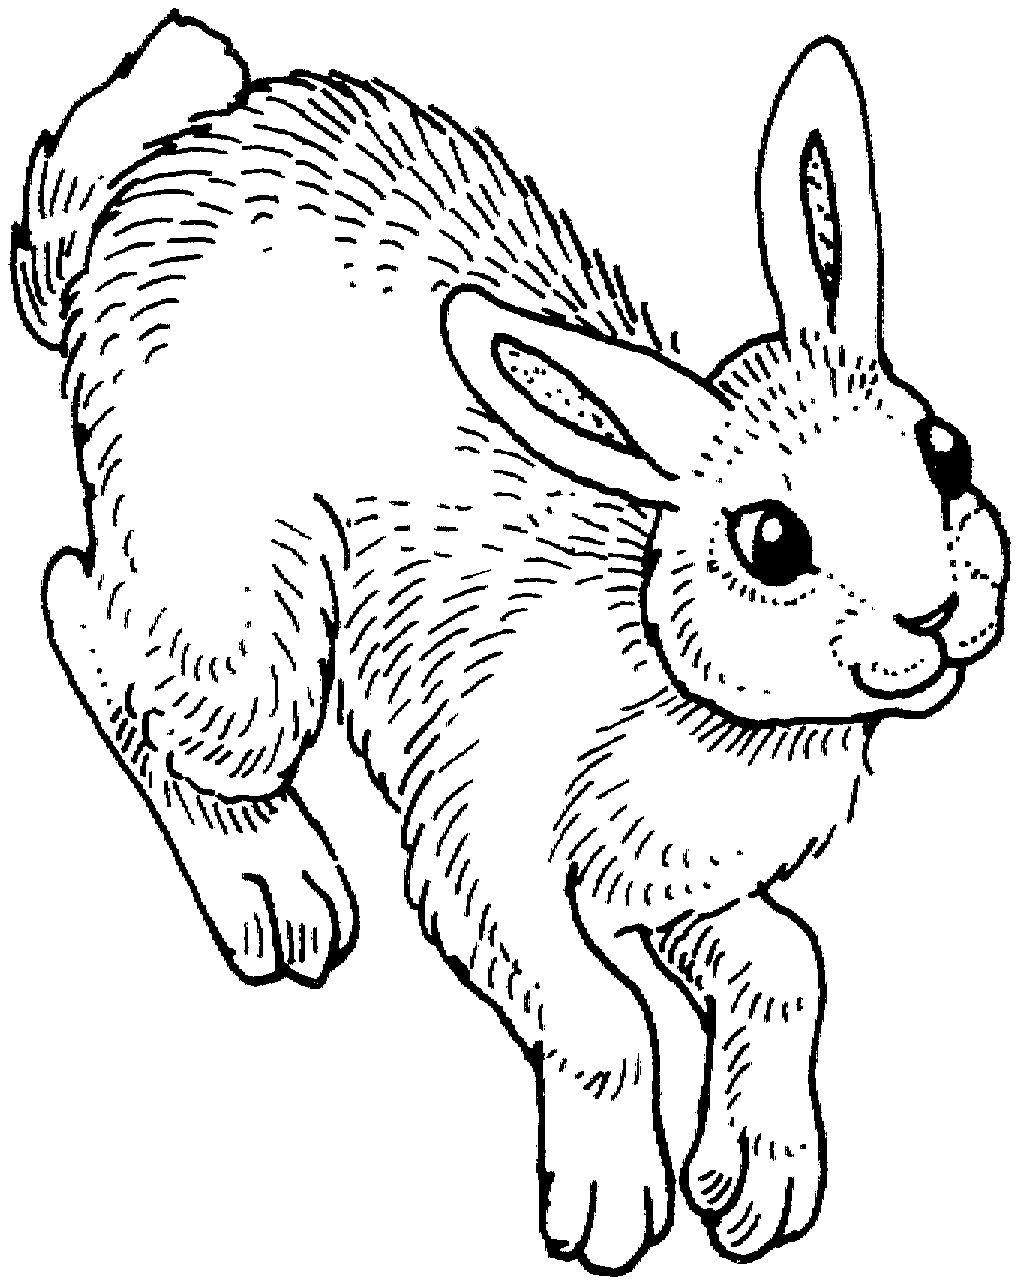 rabbit color page 60 rabbit shape templates and crafts colouring pages page color rabbit 